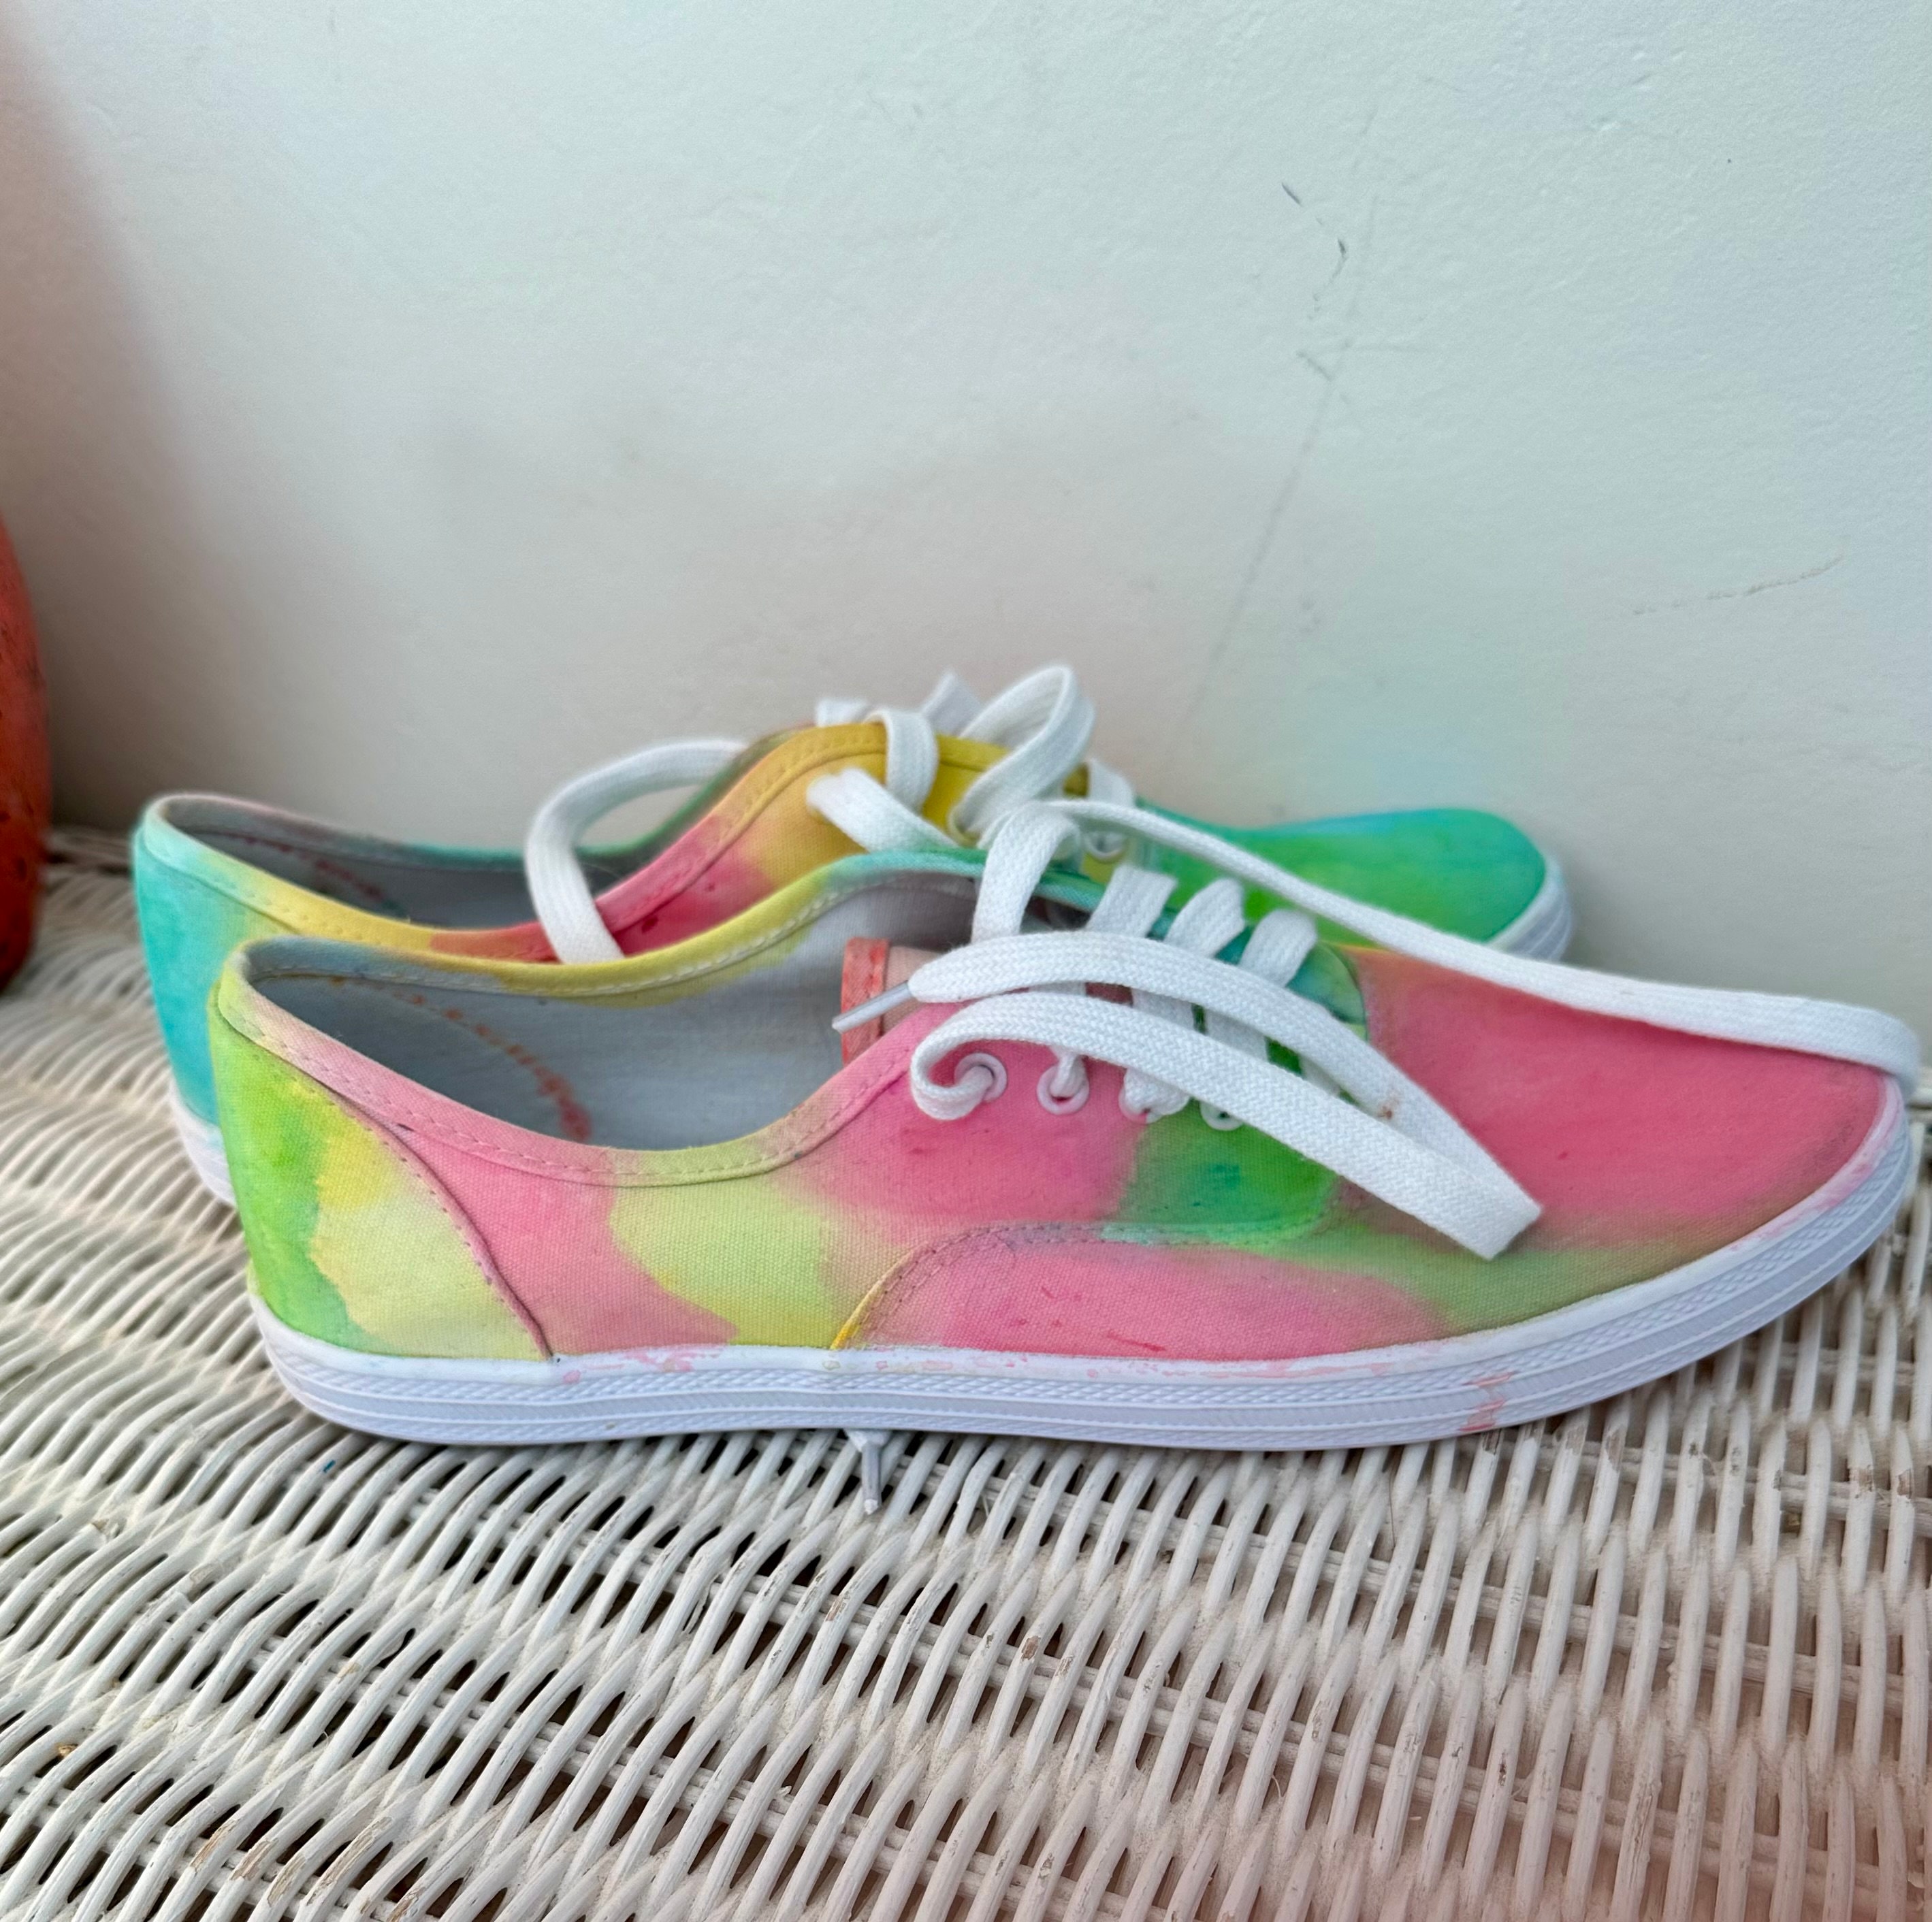 Whimsical Painted Shoes: from boring to fancy